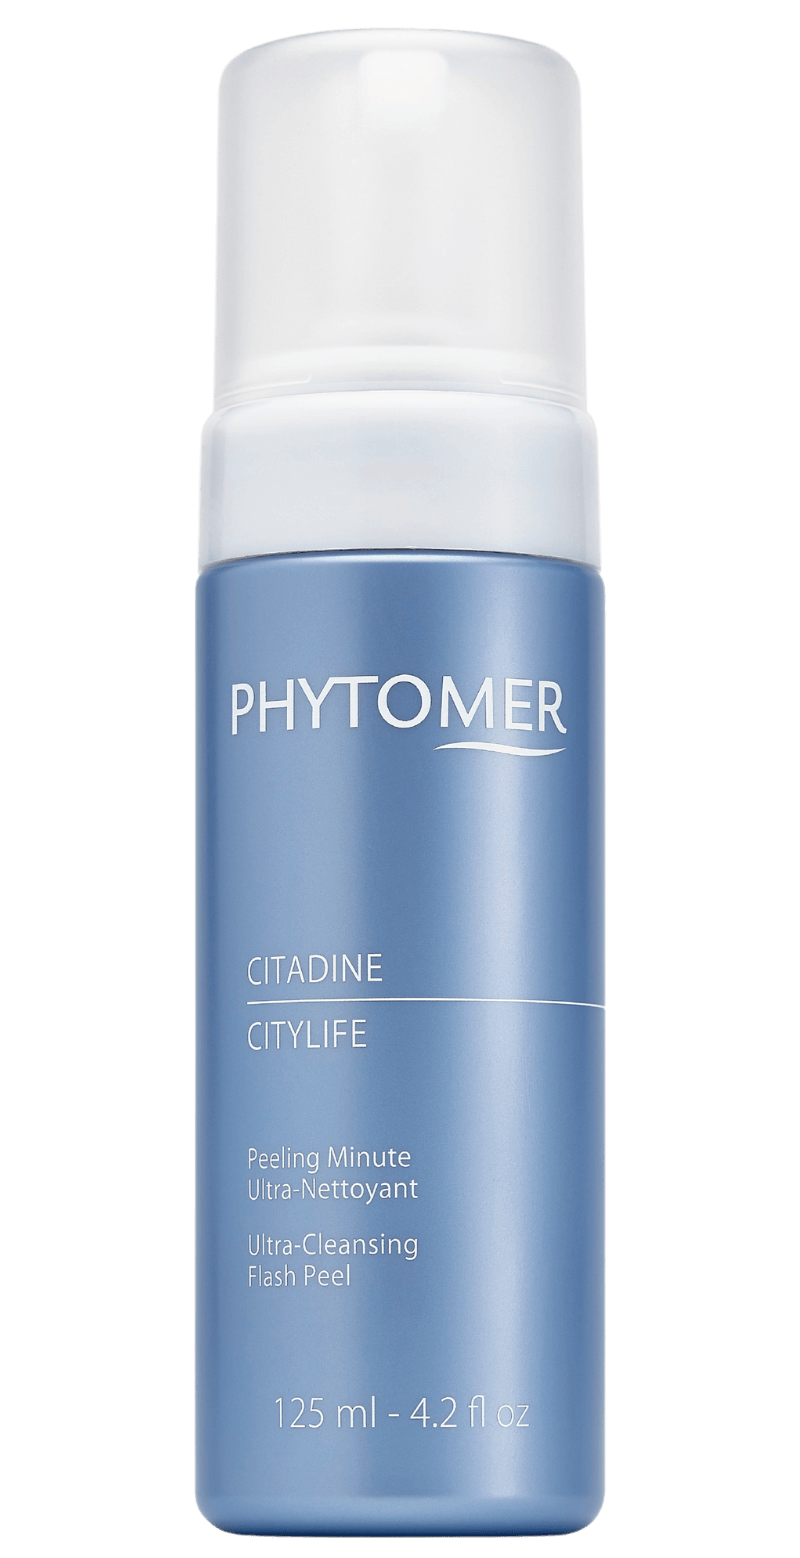 &#39;s Phytomer CITYLIFE Ultra-Cleansing Flash Peel - Bellini&#39;s Skin and Parfumerie 